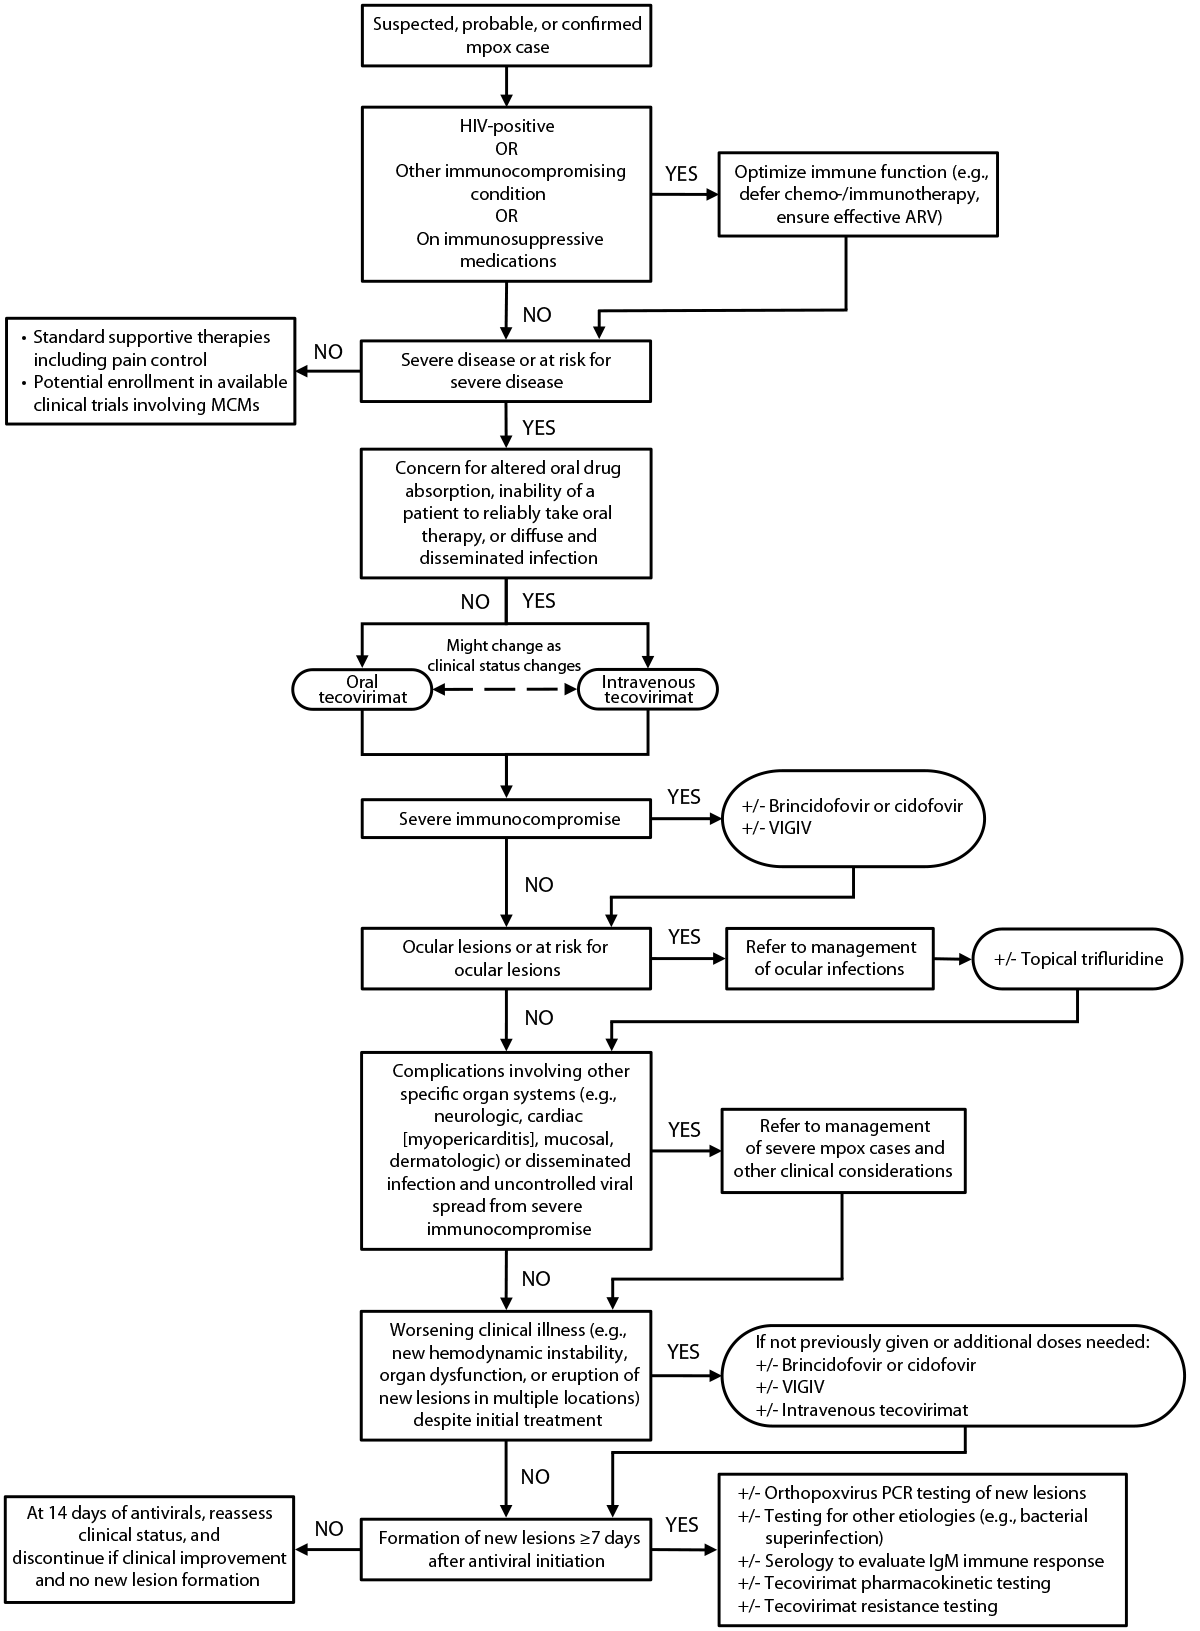 The figure is flow chart showing the approach to treatment of patients with severe or at risk for severe manifestations of mpox in the United States during February 2023.